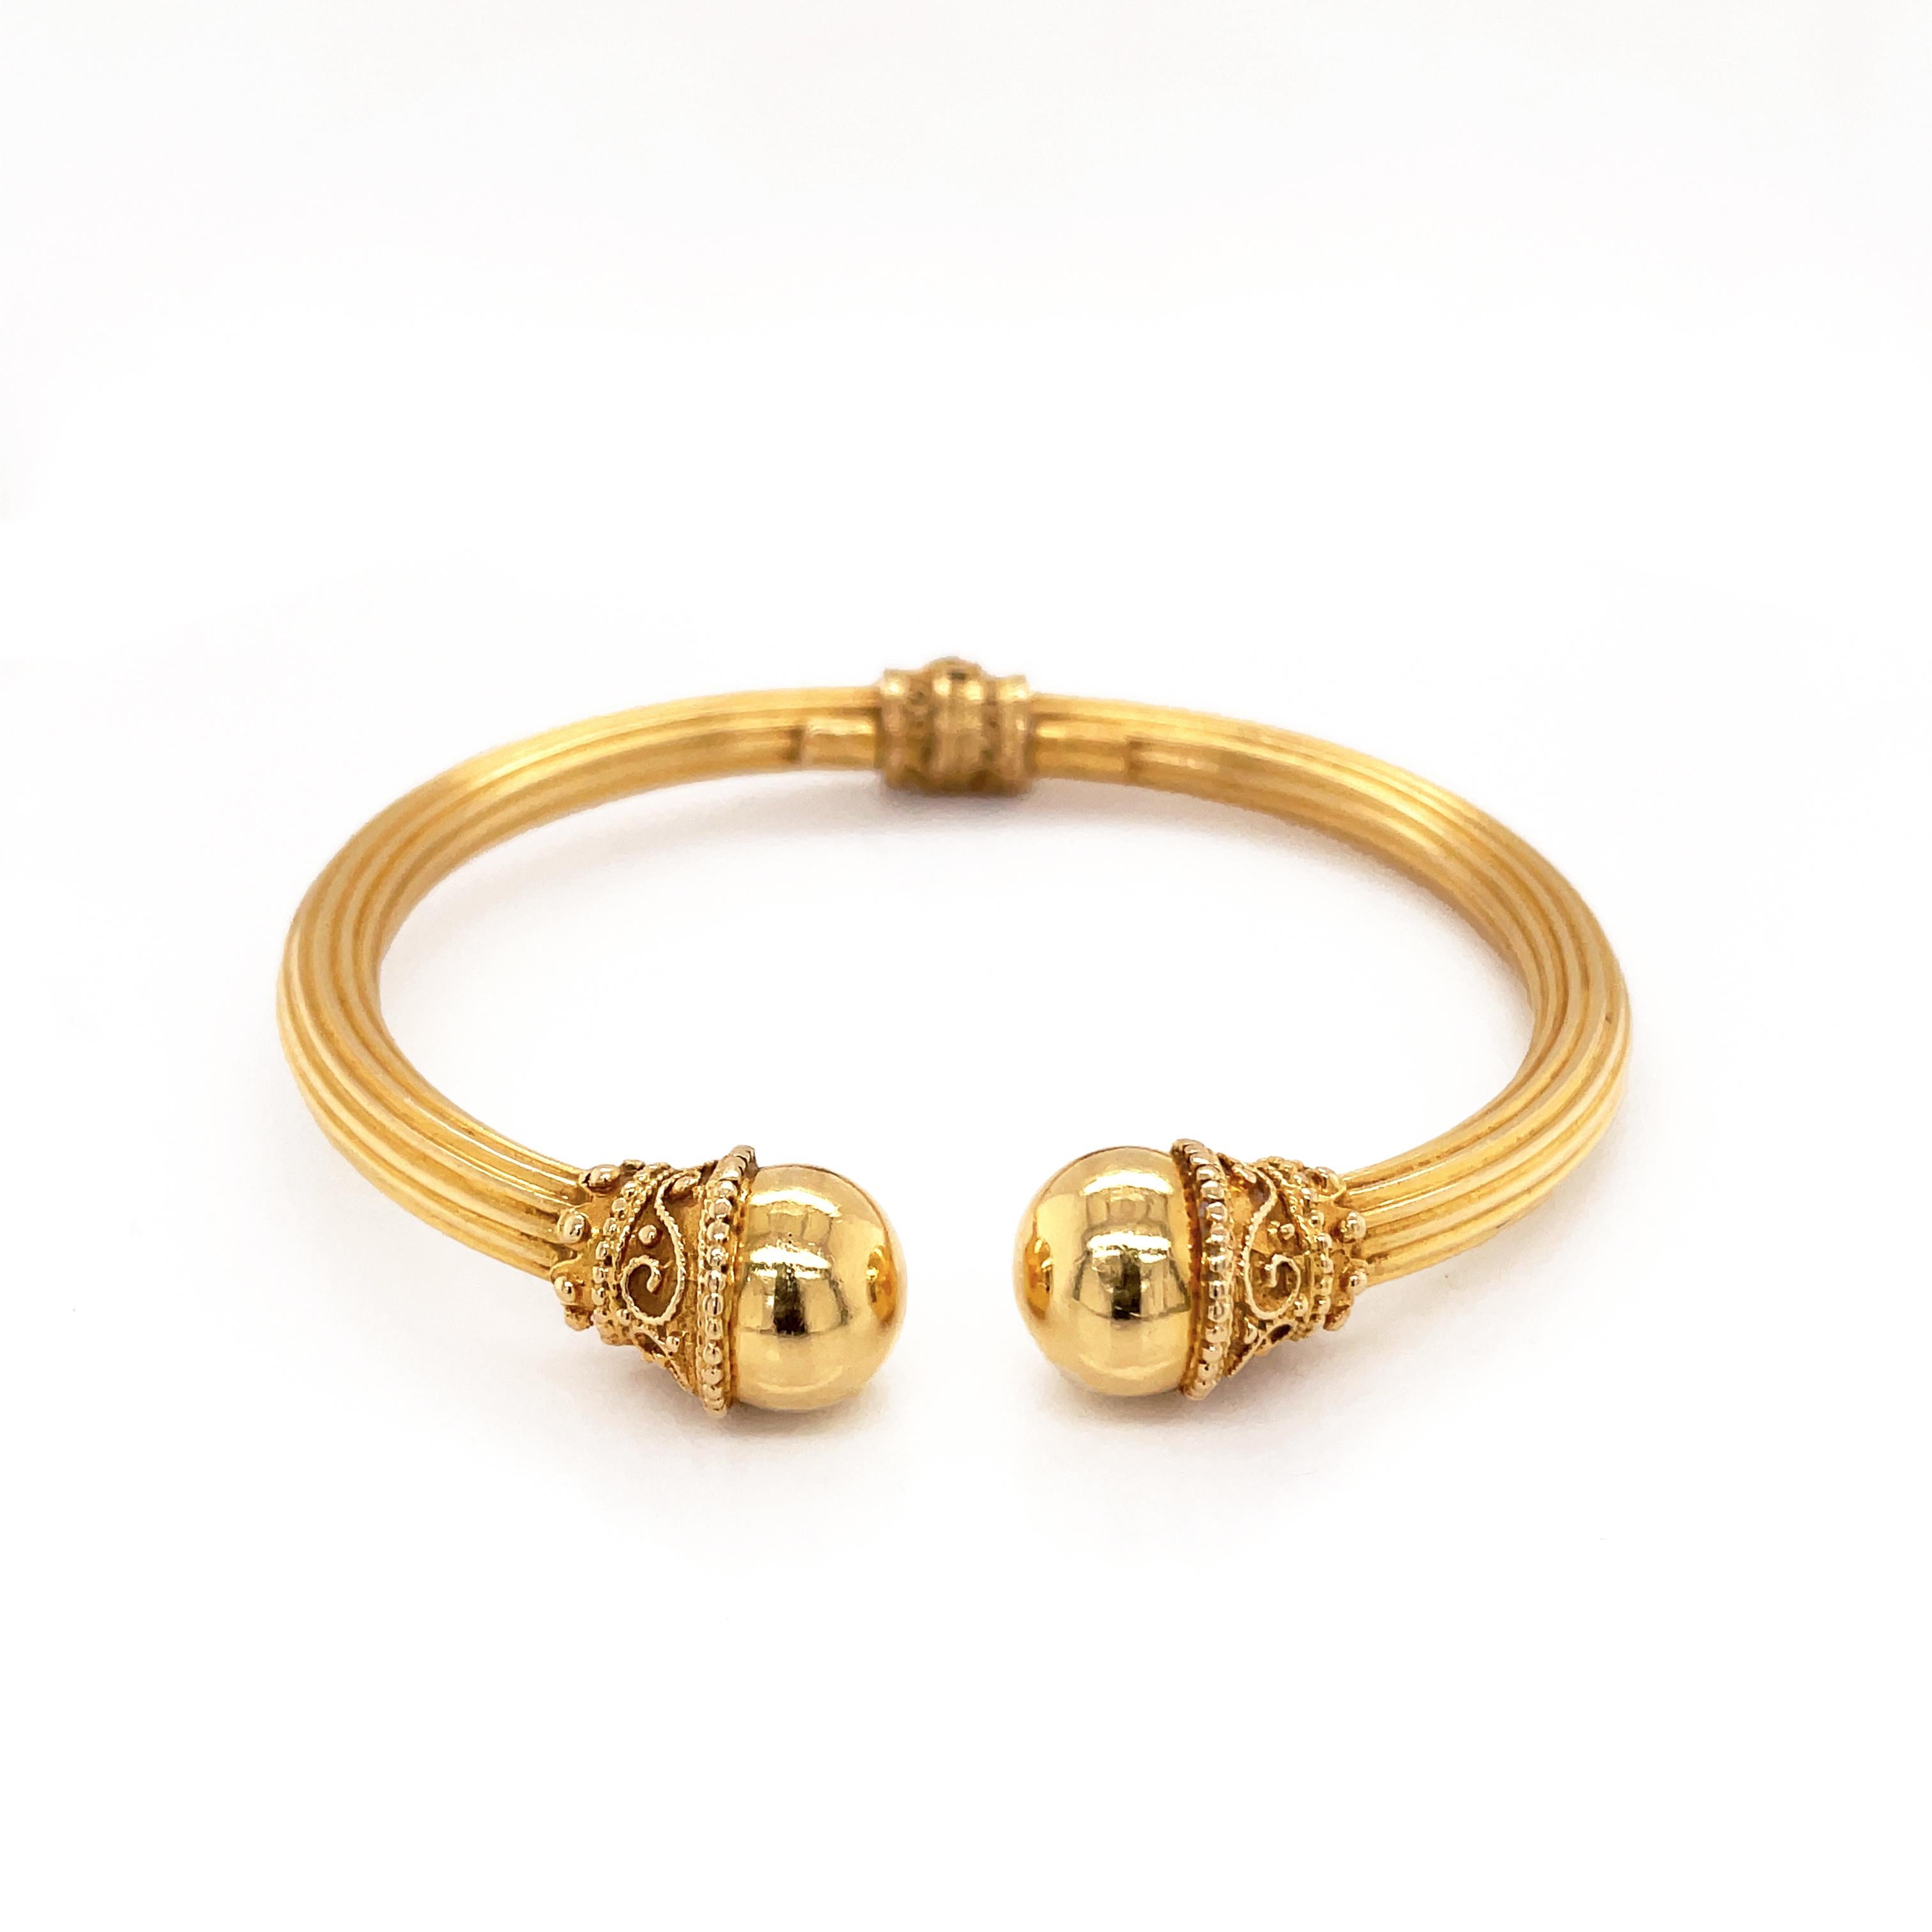 This elegant bangle was created by Greek designer, Ilias Lalaounis for his Hellenistic collection. The bangle is beautifully decorated with ornate raised filigree engraving on either end, holding a smooth sphere and finished with a matching detailed